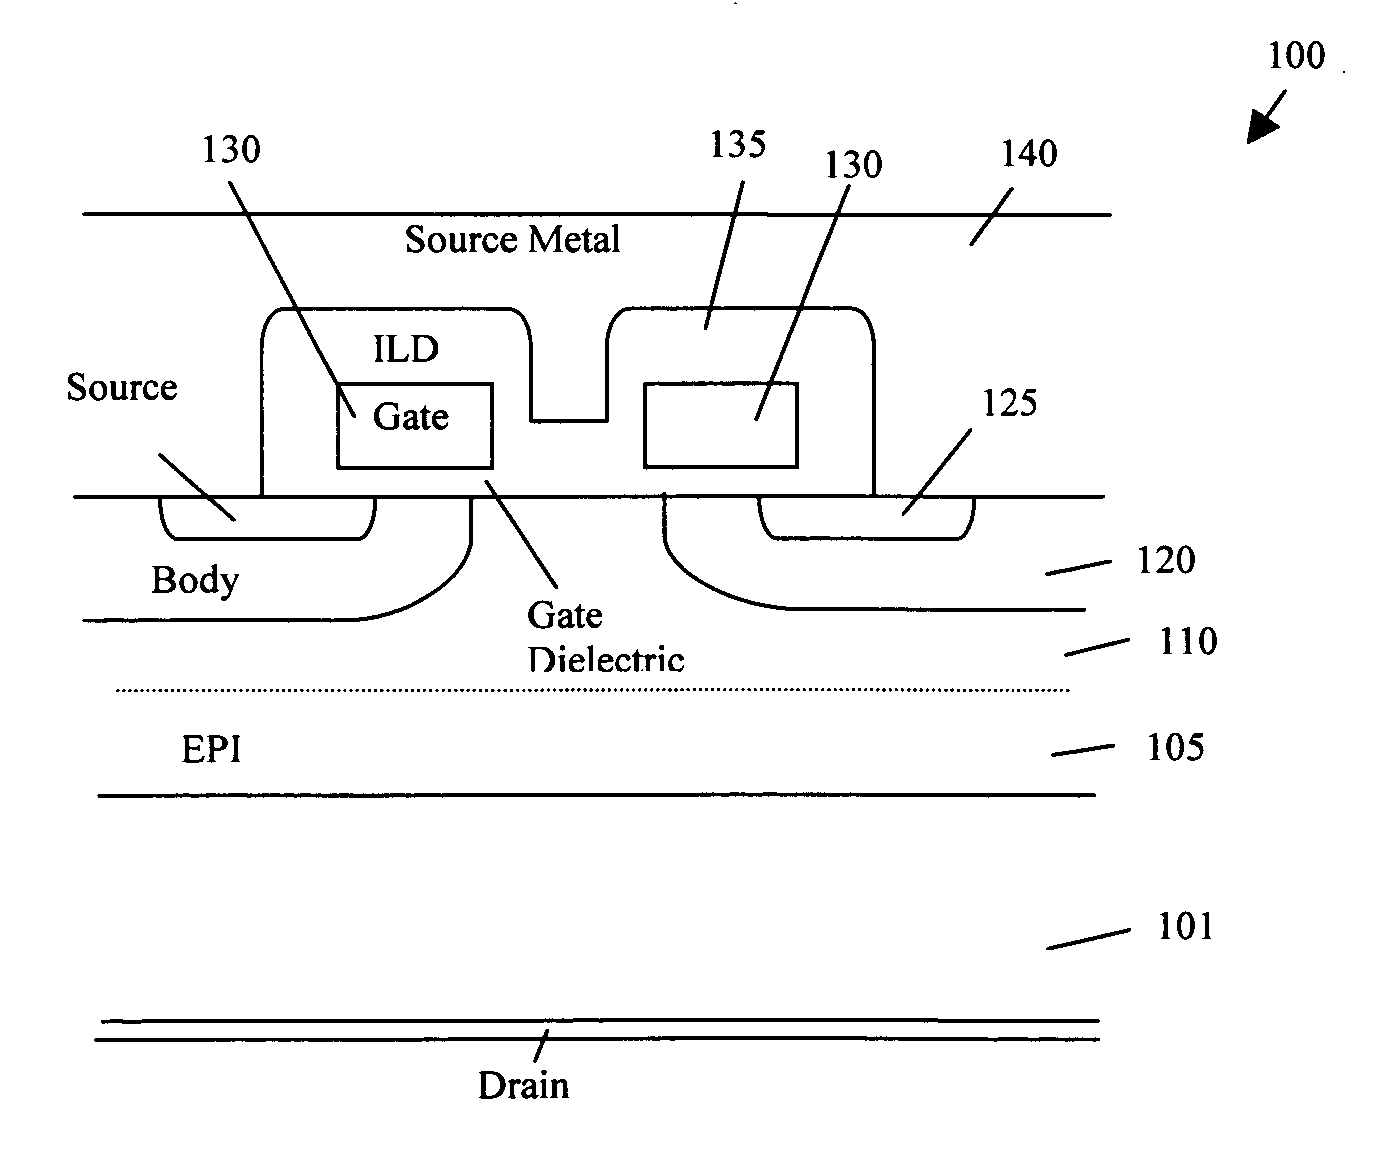 Power MOSFET device structure for high frequency applications